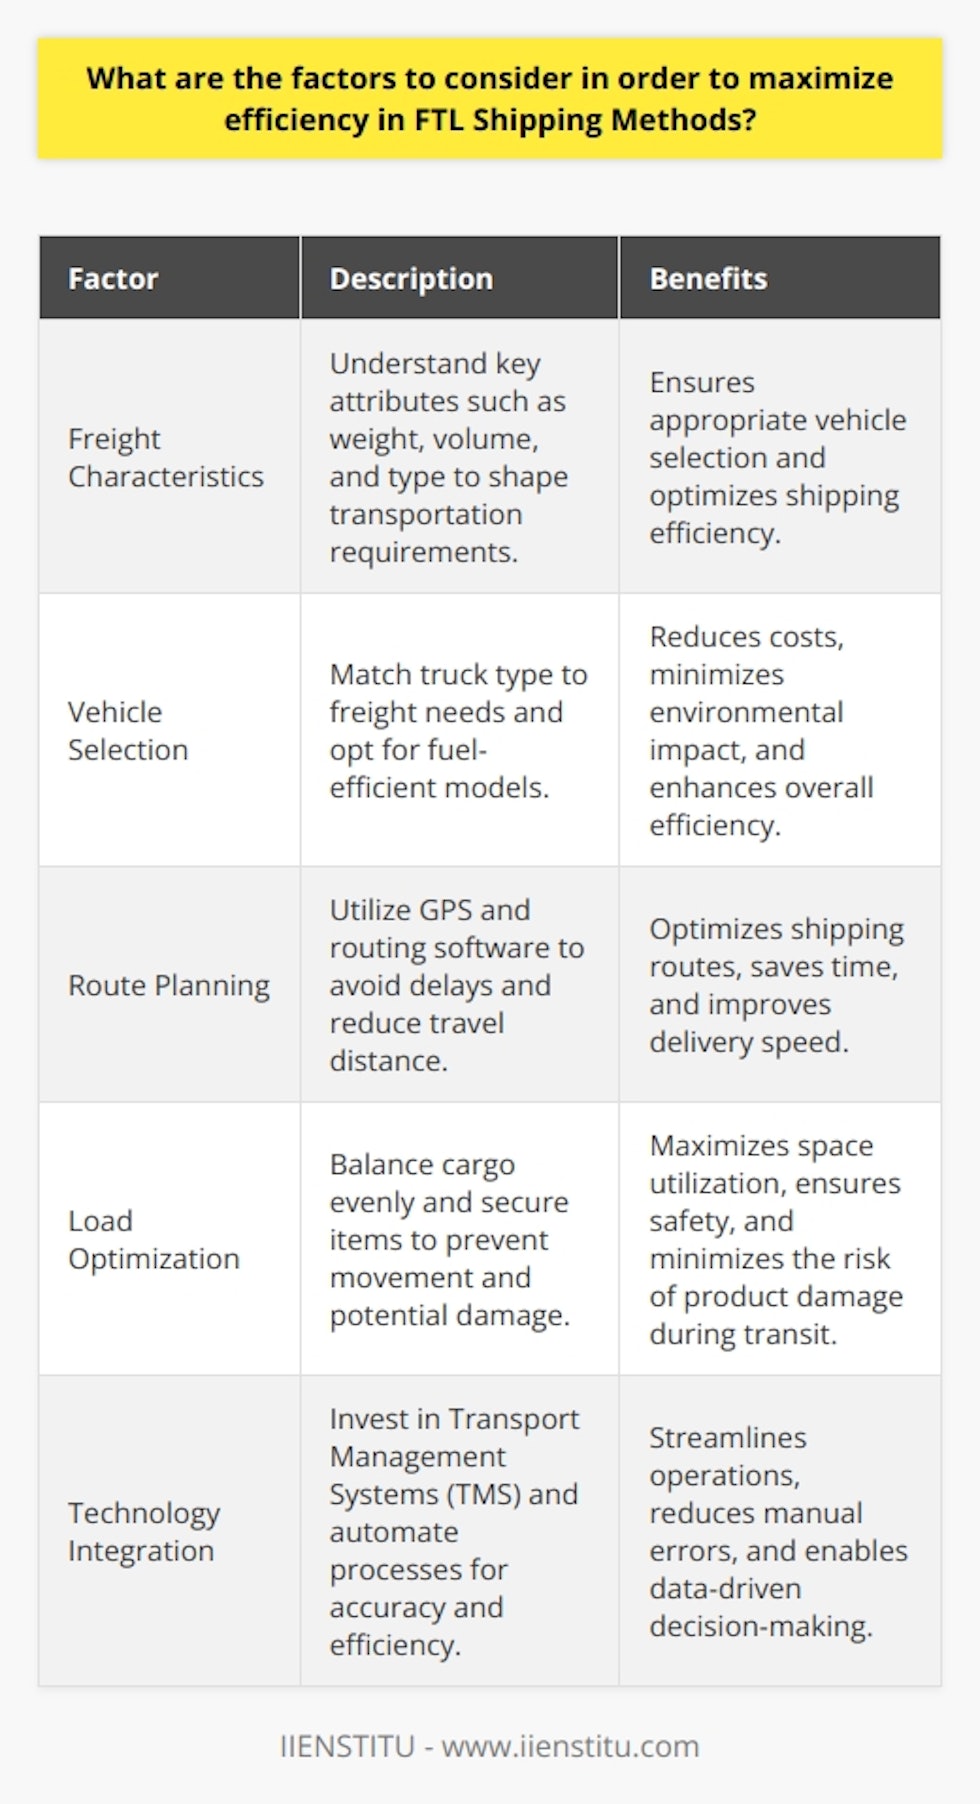 Full Truckload (FTL) Shipping Efficiency Understand Freight Characteristics Maximizing efficiency in FTL shipping starts with understanding  freight characteristics . Key attributes include weight, volume, and type. These shape transportation requirements. Select the Appropriate Vehicle Vehicle selection impacts efficiency. Match truck type to freight needs. Opt for fuel-efficient models to reduce costs and environmental impact. Optimize Route Planning Smart route planning is essential. Utilize GPS and routing software. These tools avoid delays and reduce travel distance. Implement Load Optimization Correct load optimization ensures safety and maximizes space. Balance the cargo evenly. Secure all items to prevent movement and potential damage. Schedule Wisely Careful scheduling avoids waiting times. Align pickups and deliveries with operational hours. Prevent detention and demurrage fees. Maintain Good Carrier Relationships Good relationships with carriers bring multiple benefits. Foster communication and negotiate better rates. Reliable partners offer consistency and quality service. Leverage Technology Invest in technology to streamline processes. Use Transport Management Systems (TMS). Automate for accuracy and efficiency. Monitor Regulatory Compliance Stay current with regulations. Compliance avoids fines and delays. It also ensures road safety. Focus on Continuous Improvement Continuous improvement is key. Analyze performance data regularly. Adjust strategies as needed to achieve peak efficiency. Train and Empower Employees Effective training for staff matters. Empower employees with knowledge and tools. They manage shipments more efficiently.  Consider Environmental Impact Factor in sustainability. Opt for eco-friendly practices. Reduce carbon footprint and promote corporate responsibility. In conclusion, consider all these factors. They collectively maximize FTL shipping efficiency. Efficiency leads to cost savings and improved service delivery.